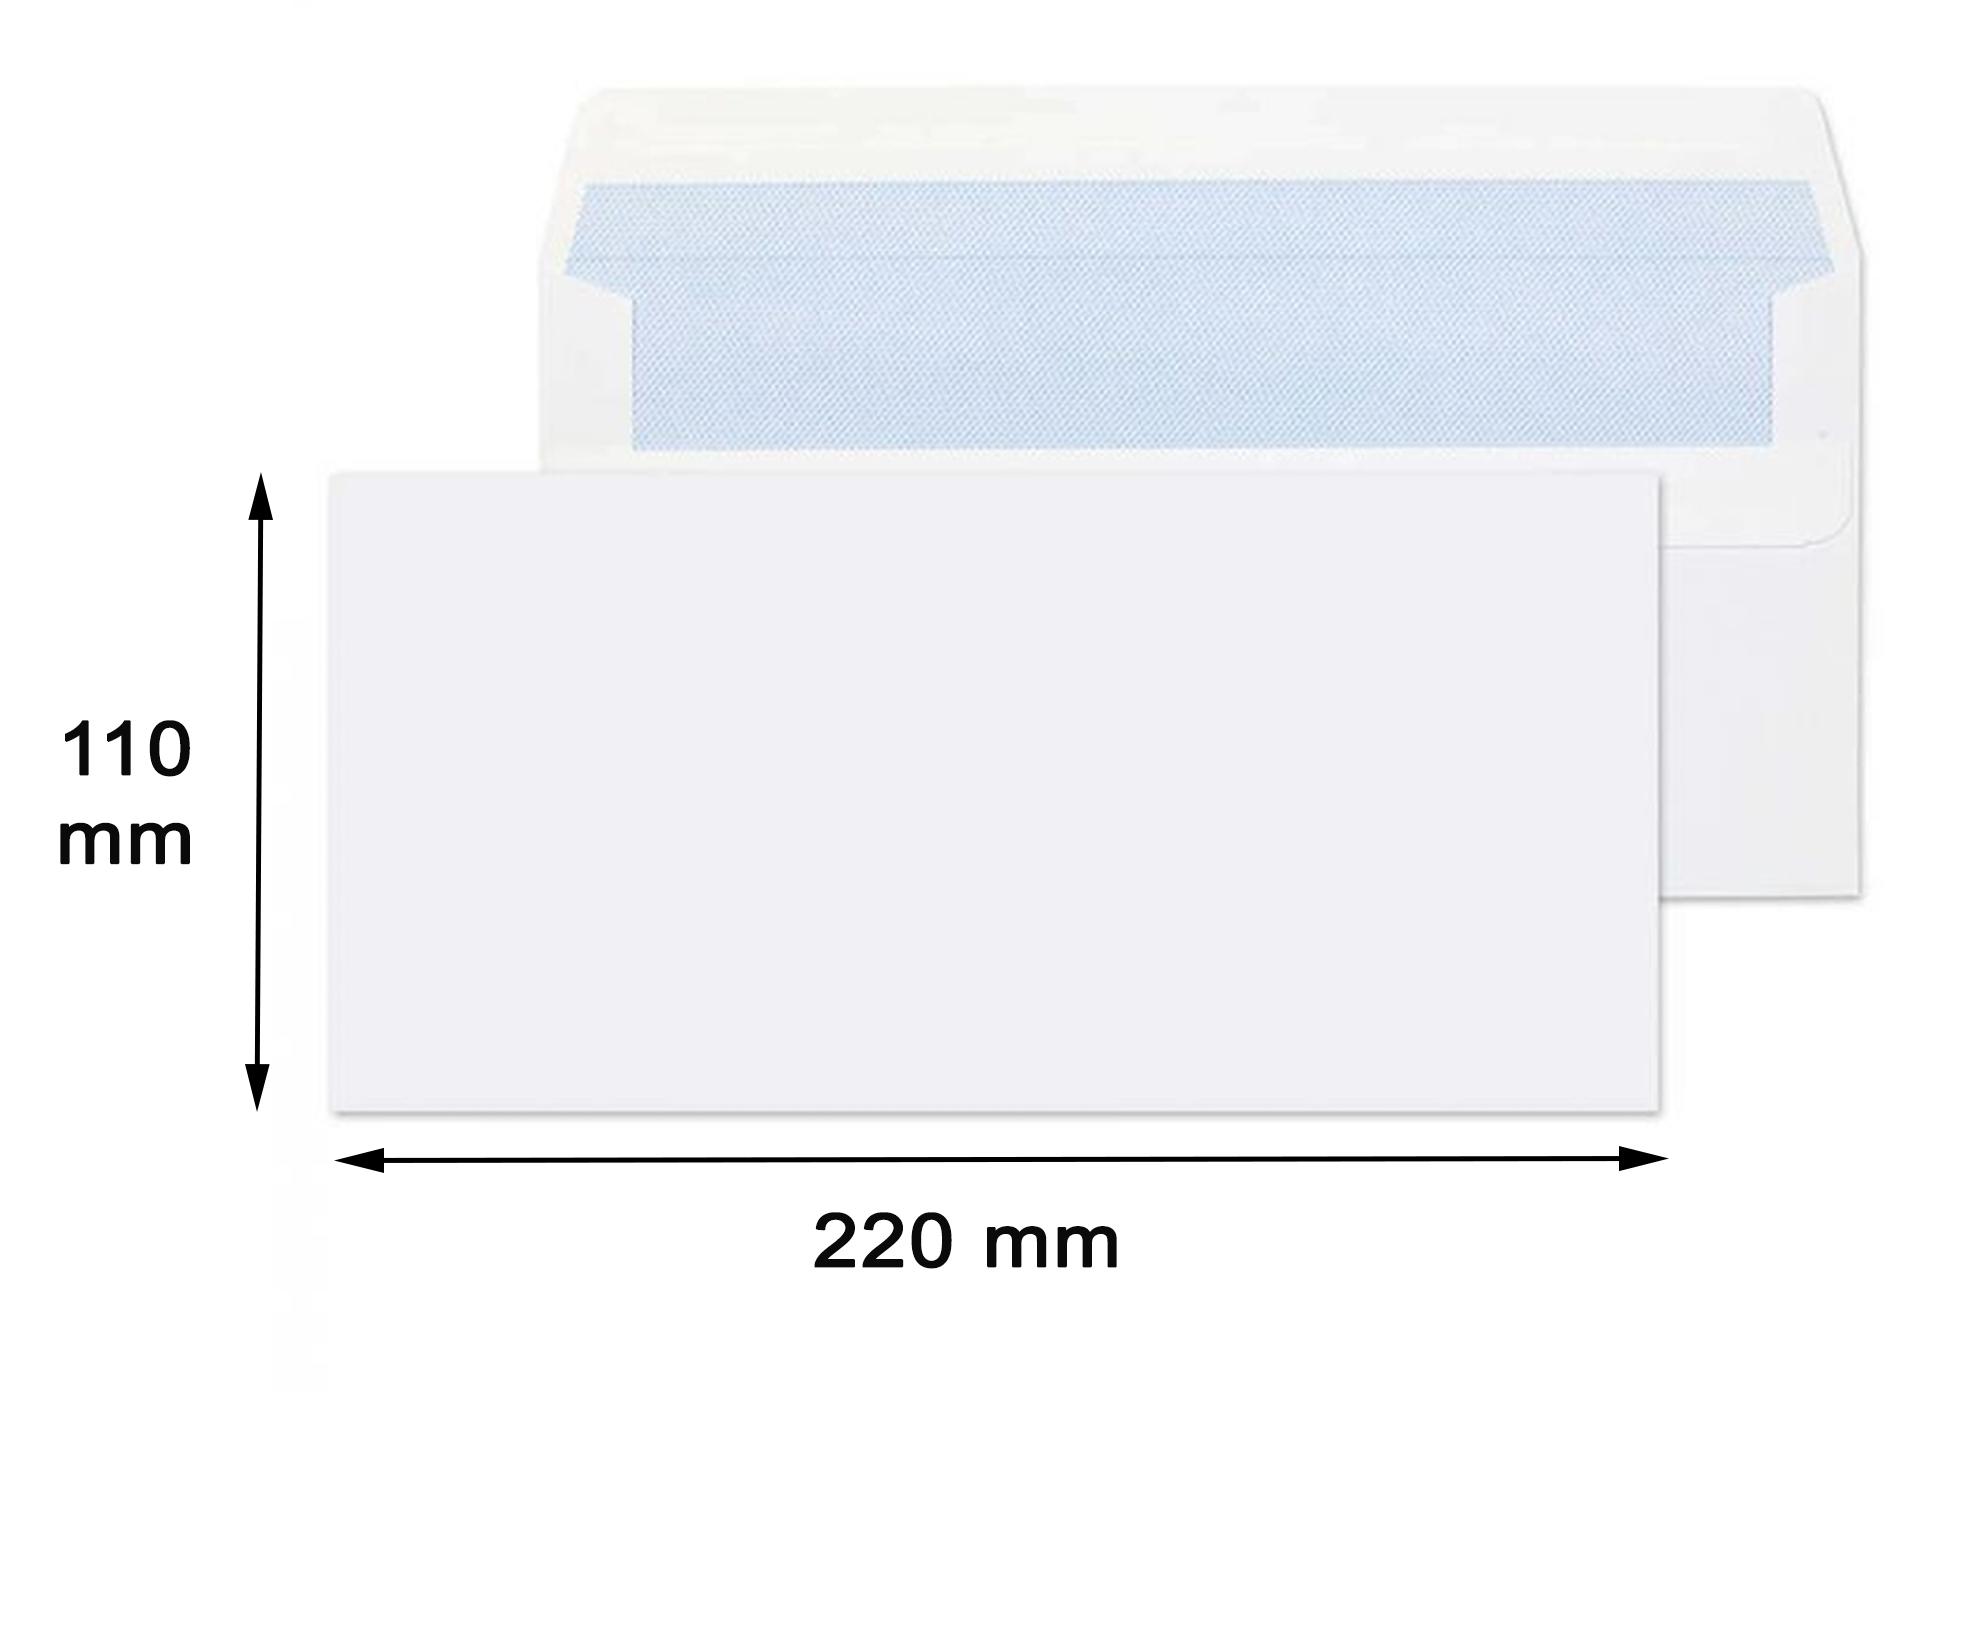 DL Envelope with dimensions